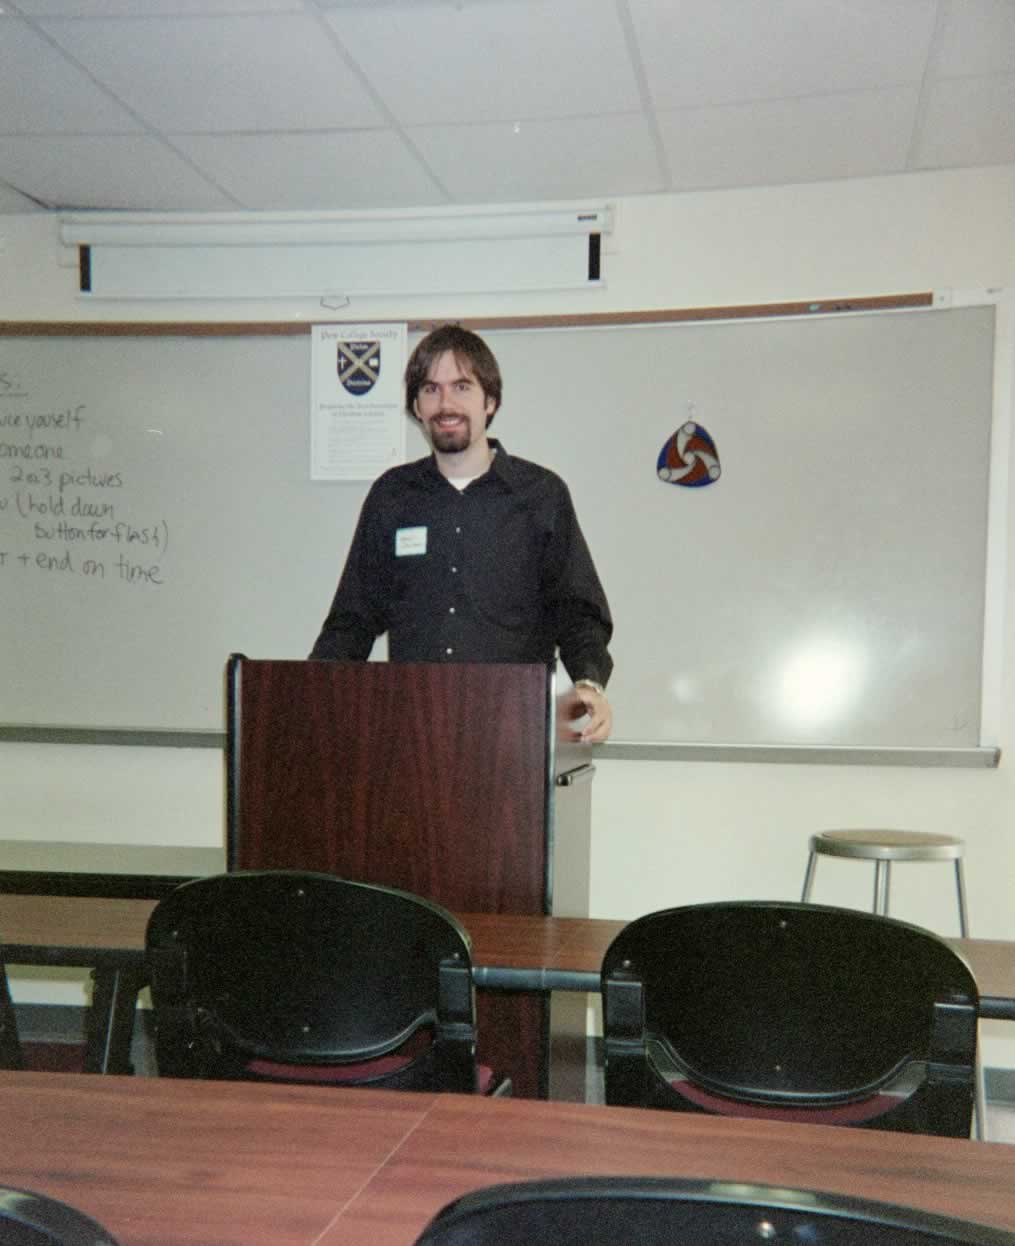 picture of a man standing in a classroom behind a podium smiling